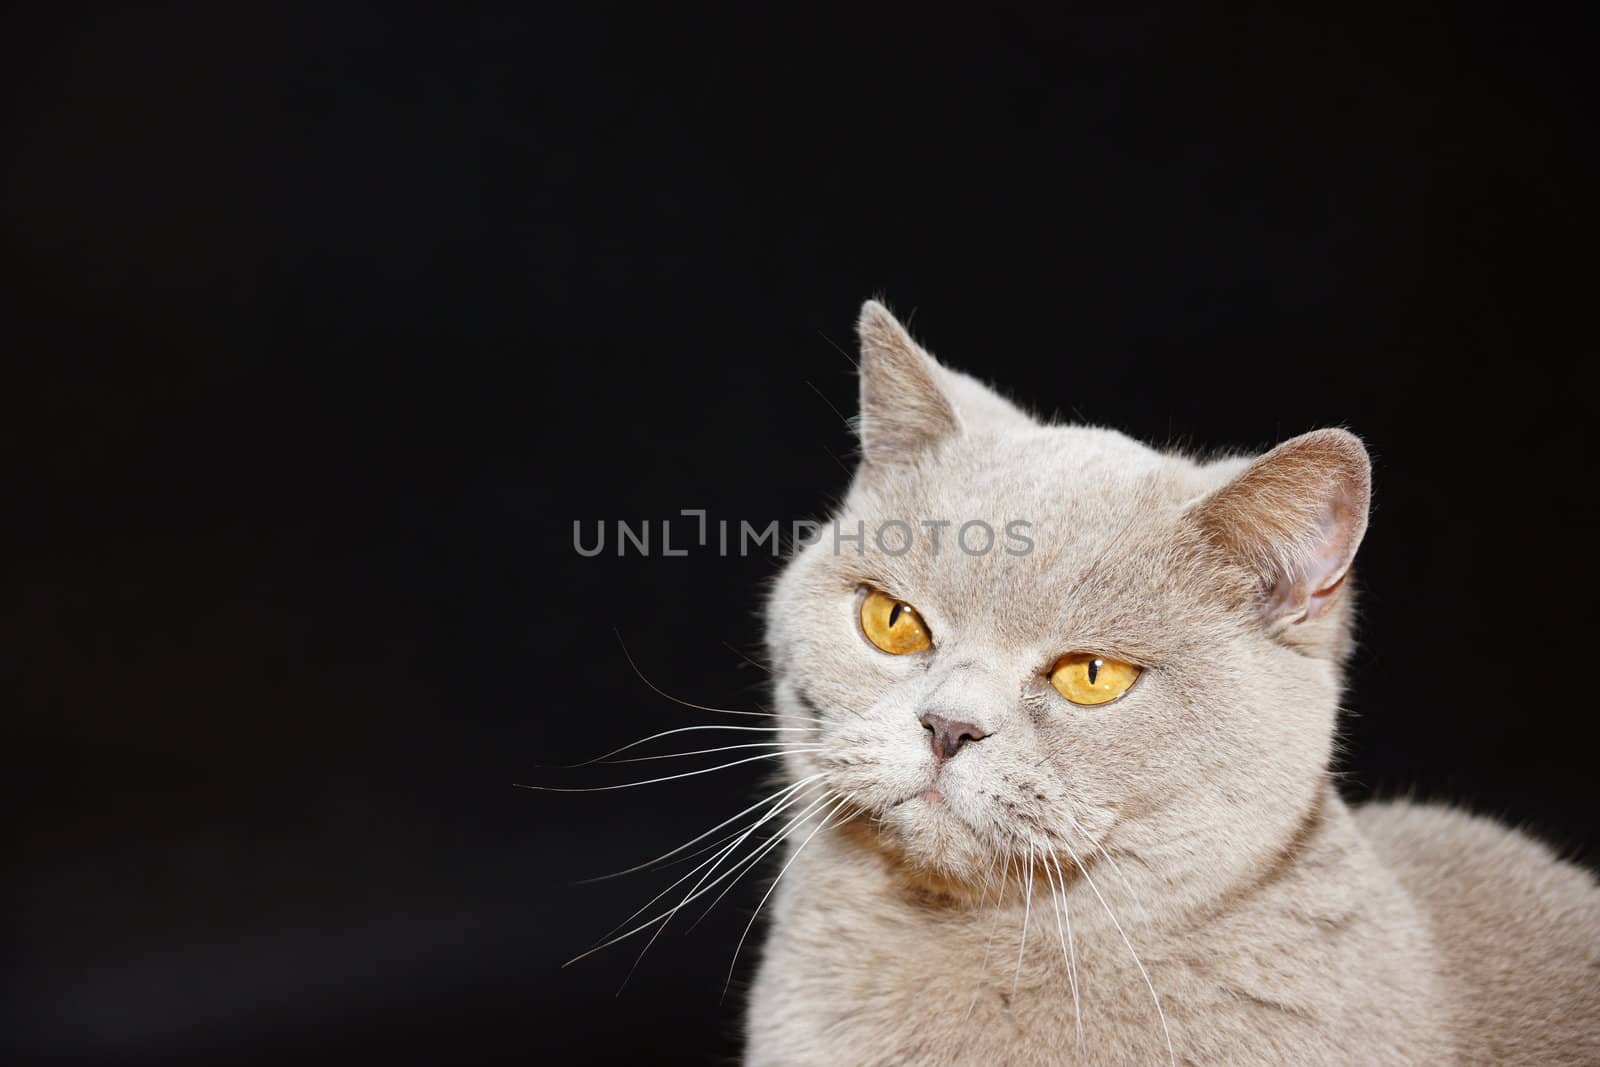 British cat on a black background with a funny and curious eyes